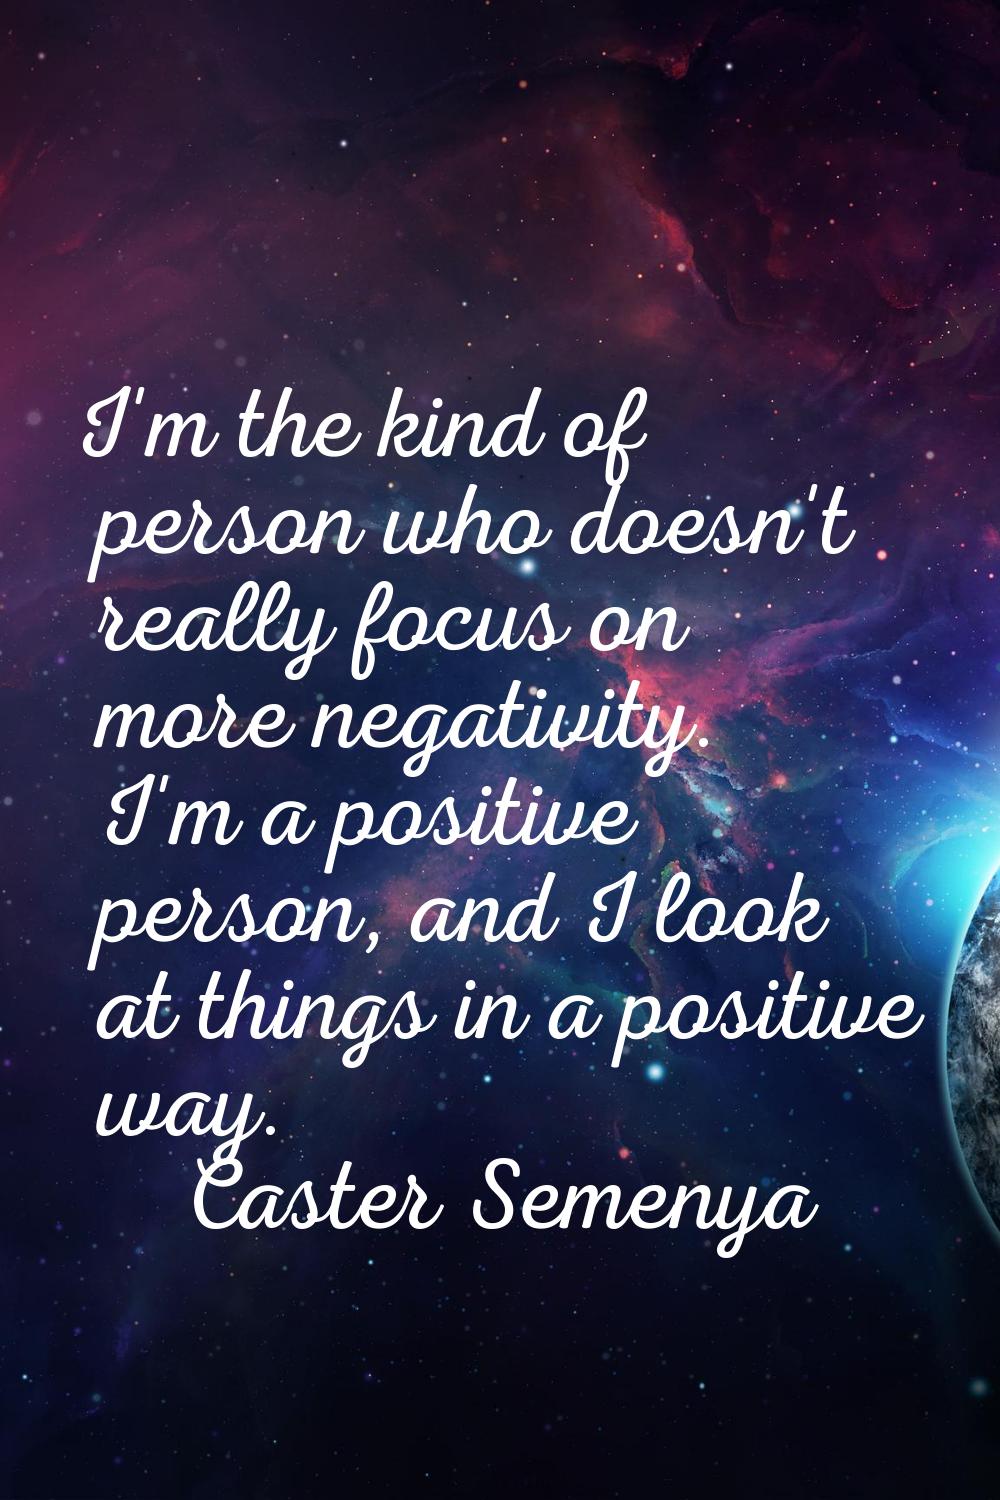 I'm the kind of person who doesn't really focus on more negativity. I'm a positive person, and I lo